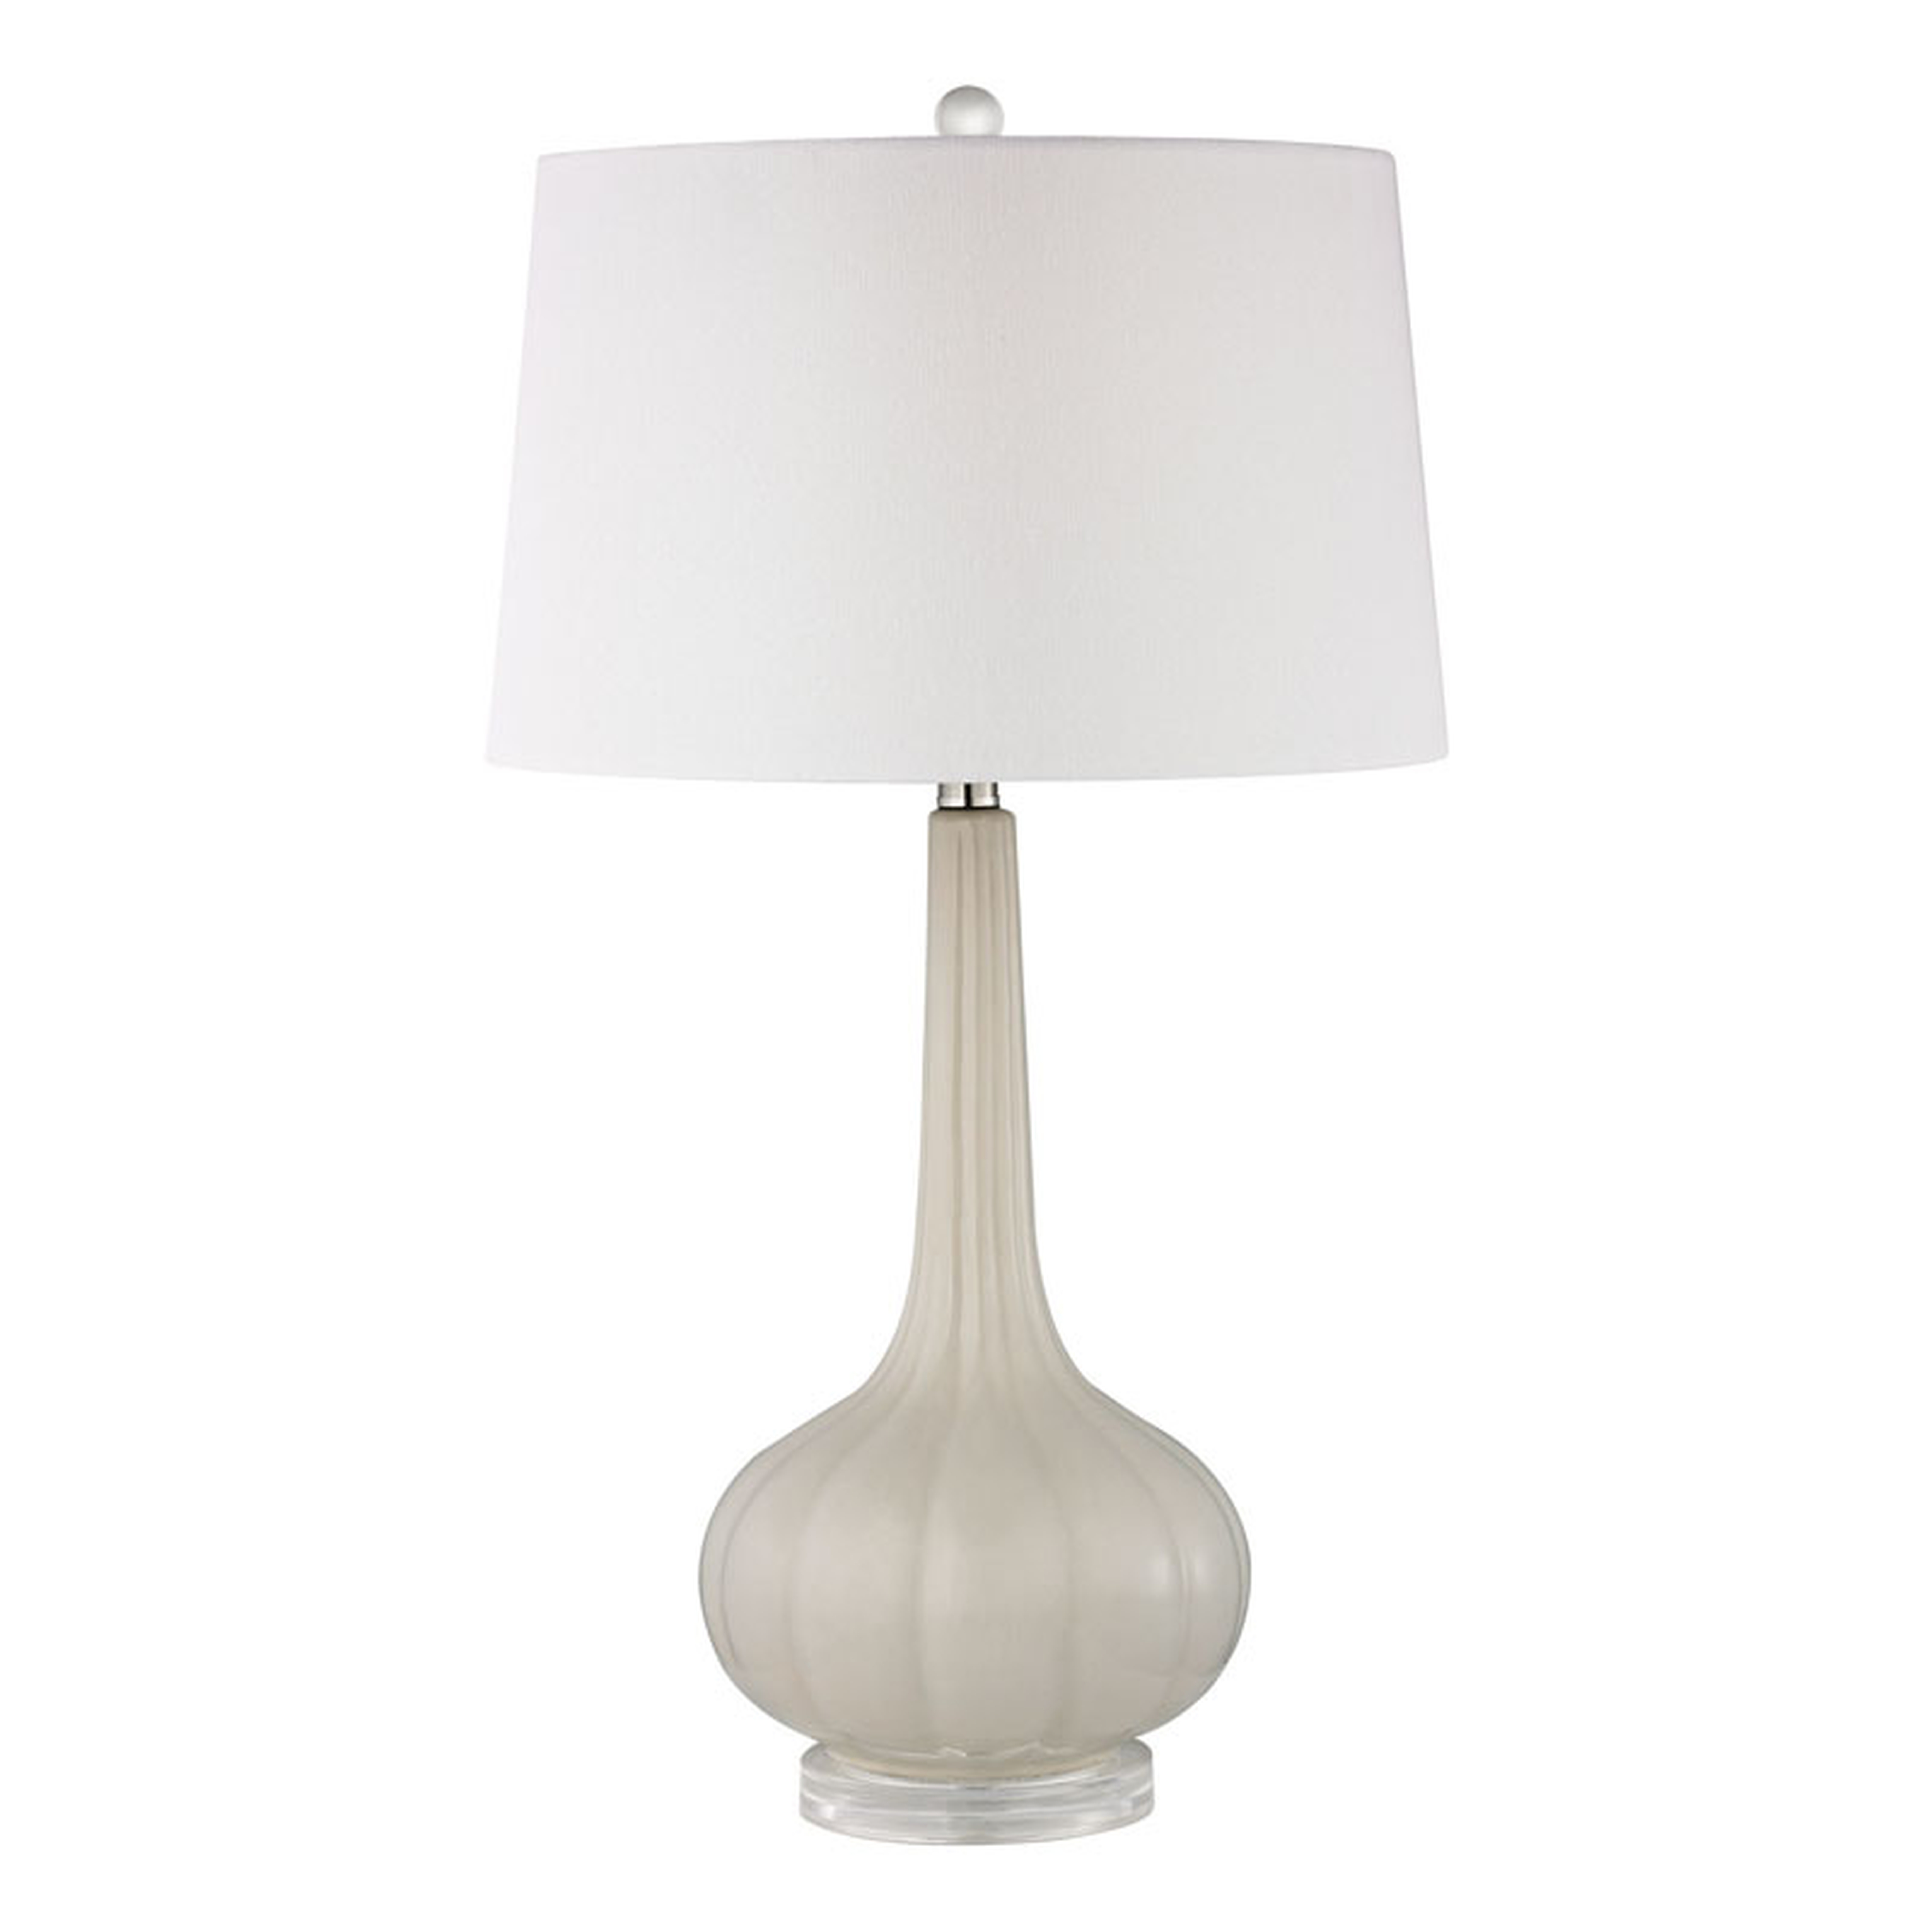 OFF WHITE FLUTED CERAMIC TABLE LAMP ON ACRYLIC BASE - Elk Home